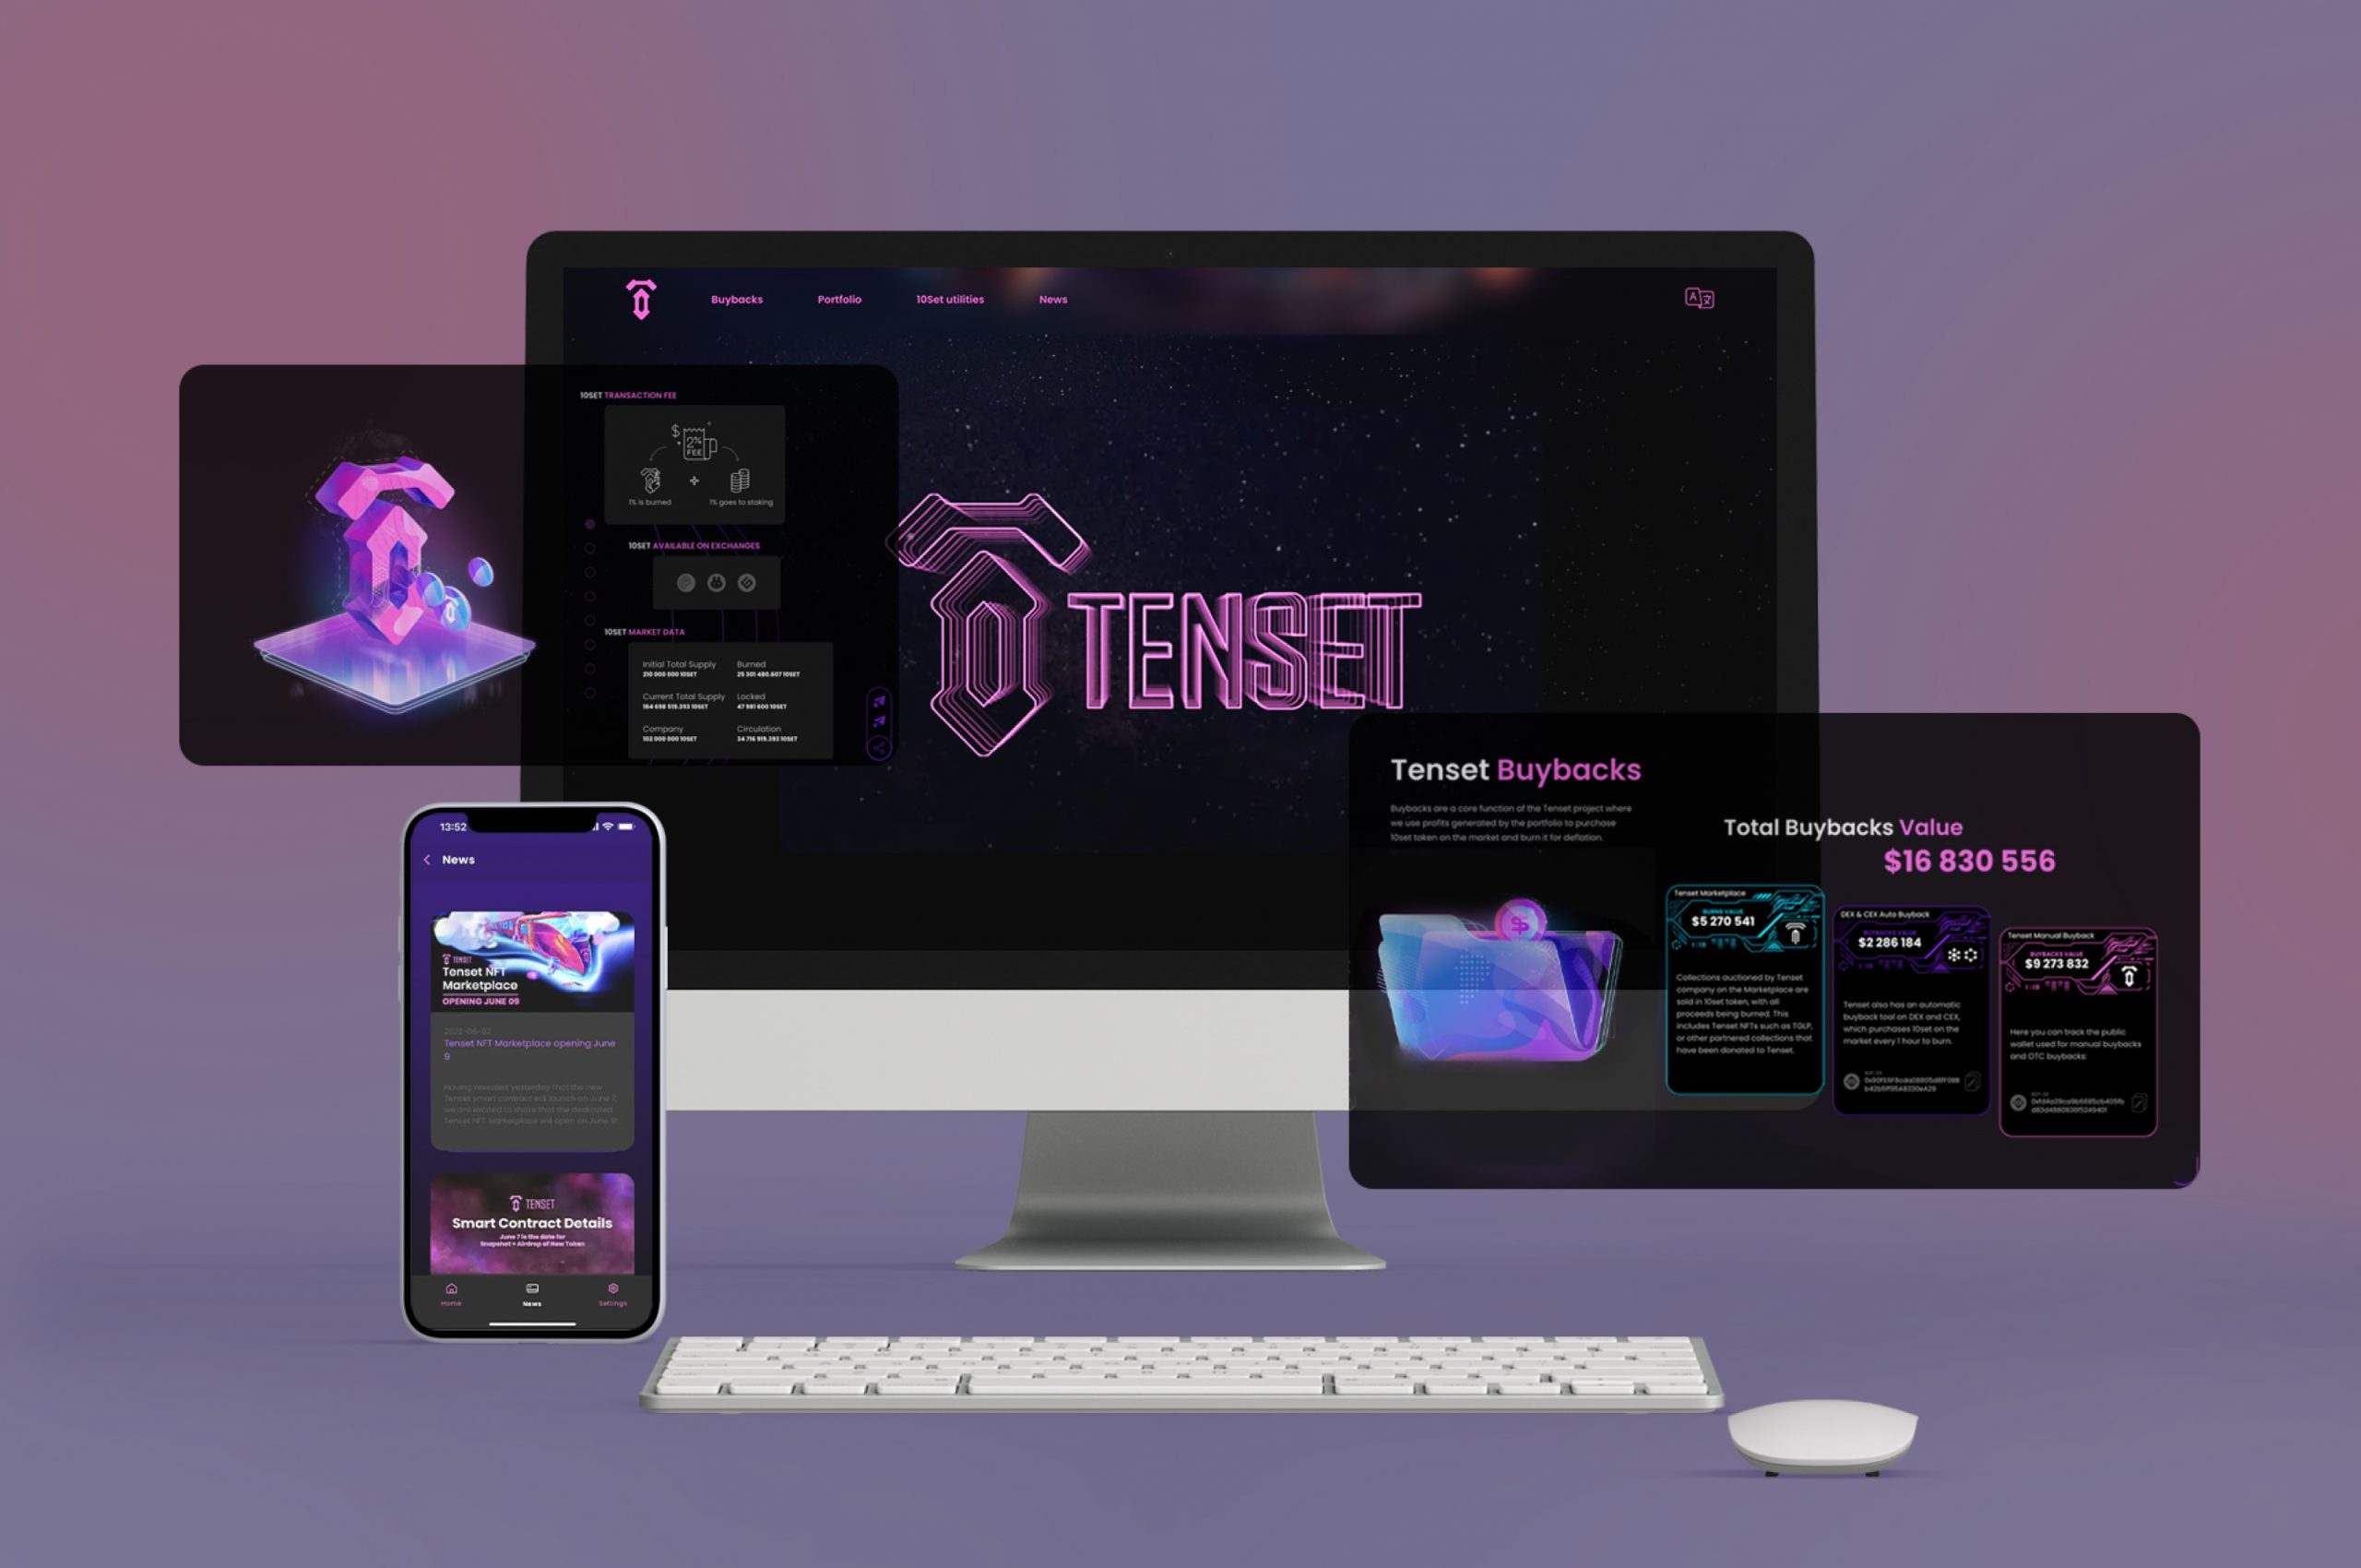 Tenset project